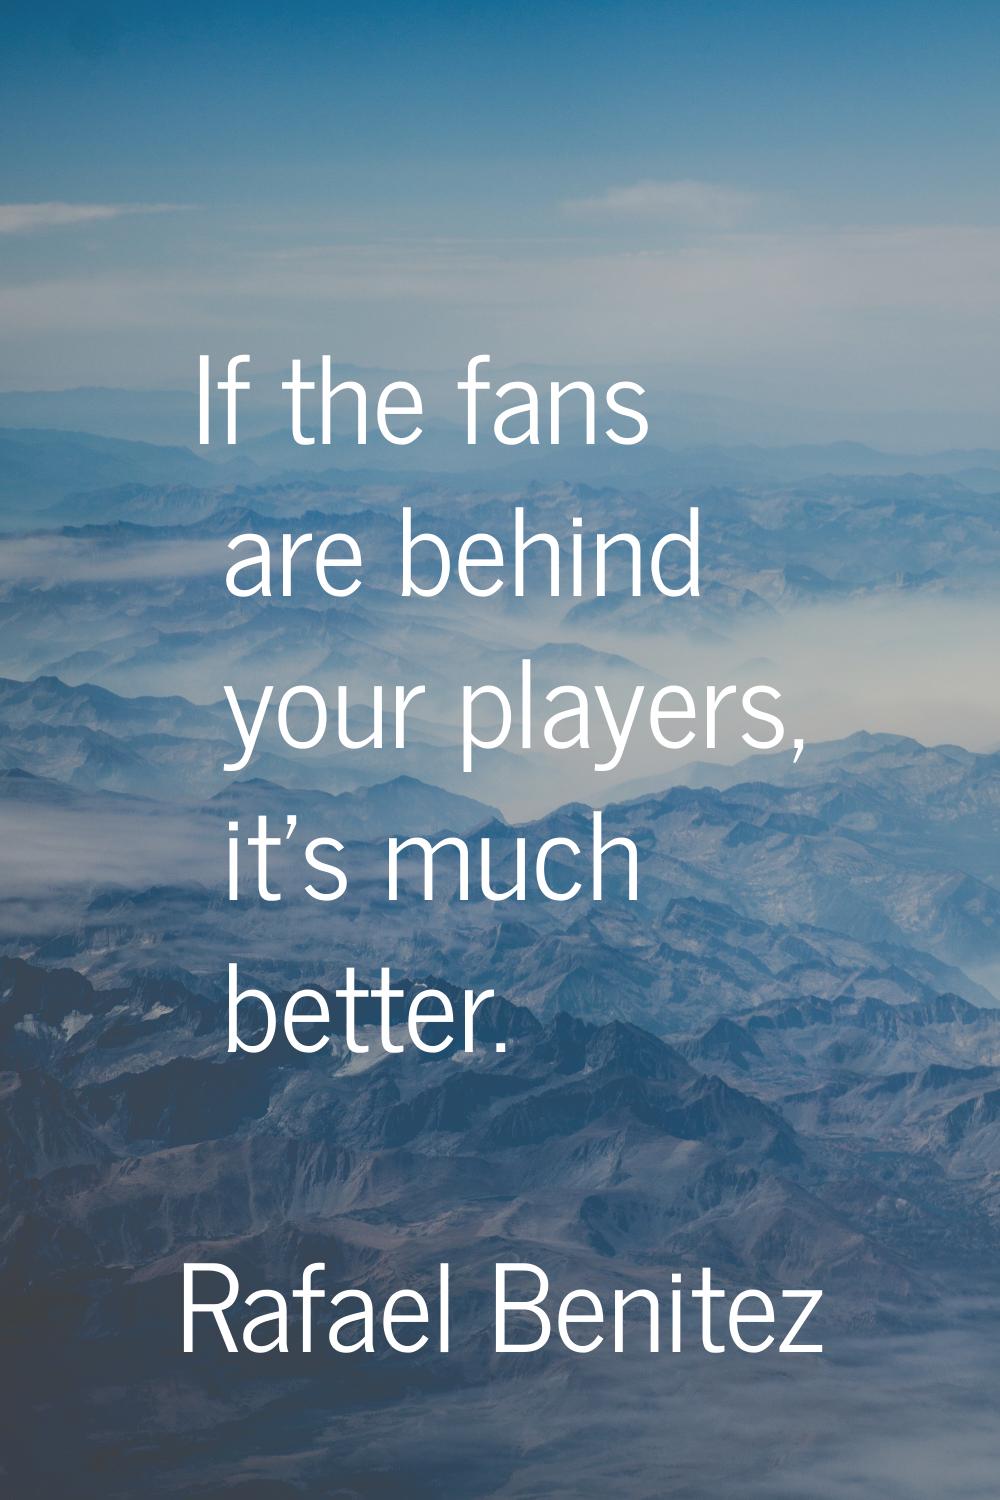 If the fans are behind your players, it's much better.